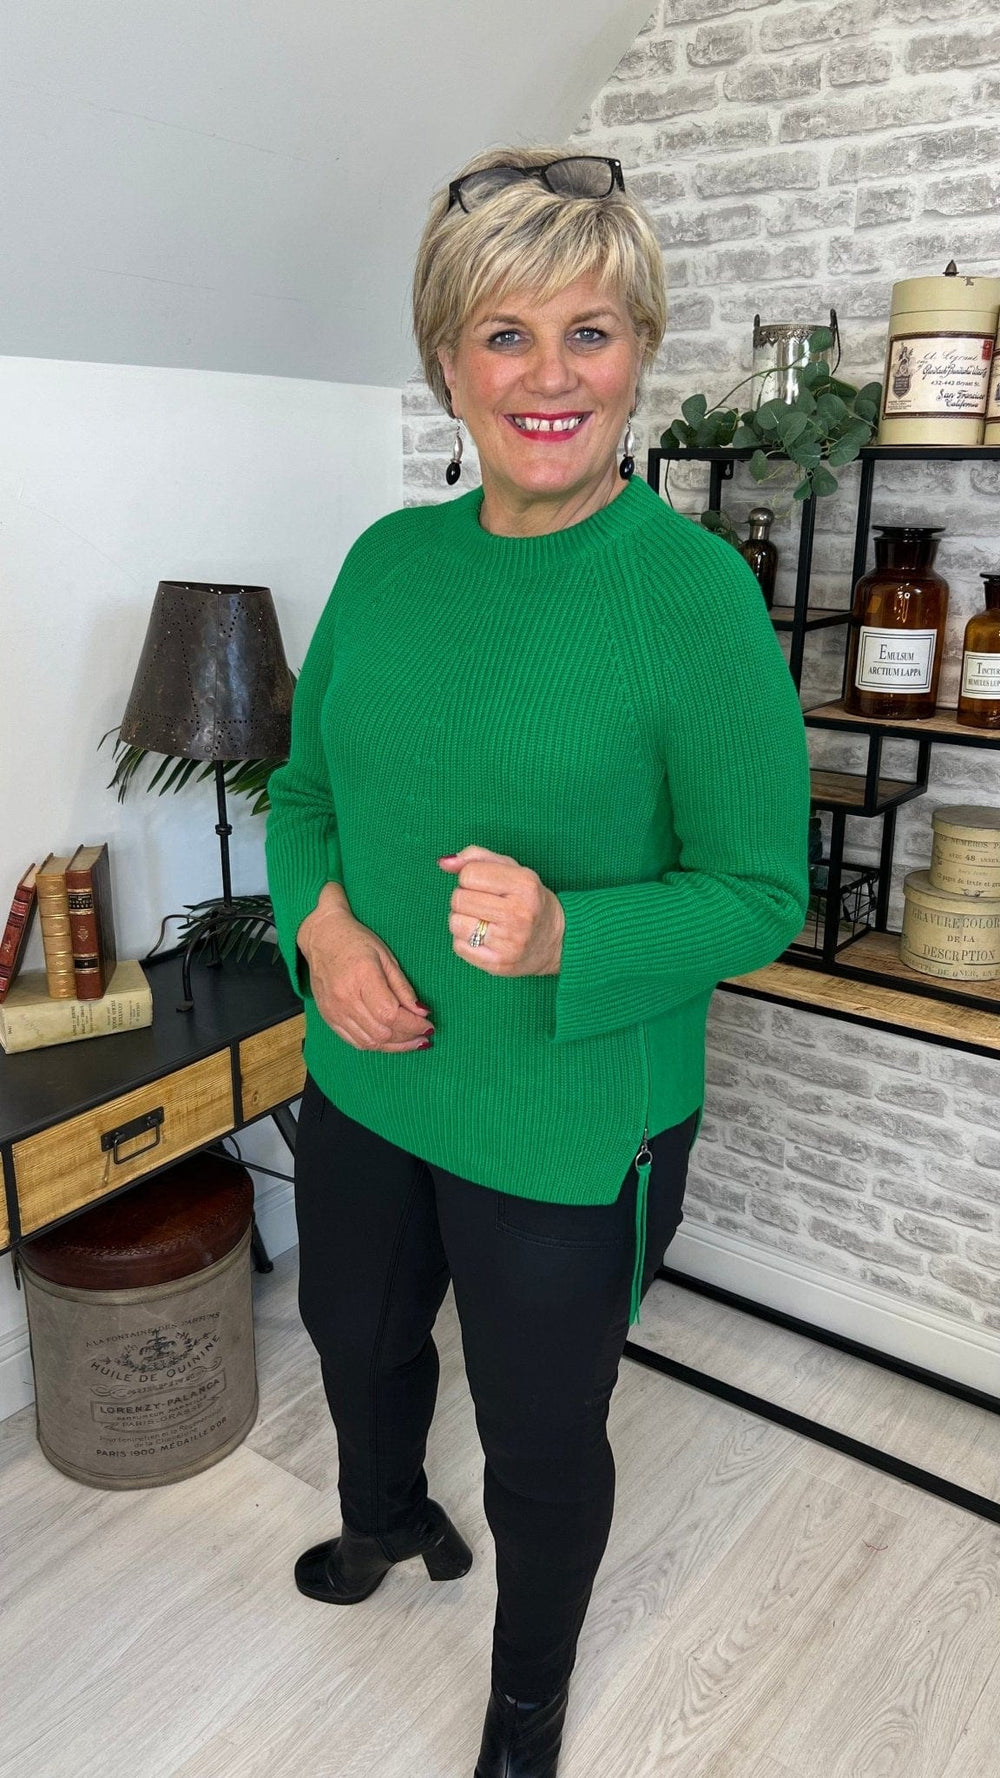 Oui Cotton Jumper With Zip In Green - Crabtree Cottage